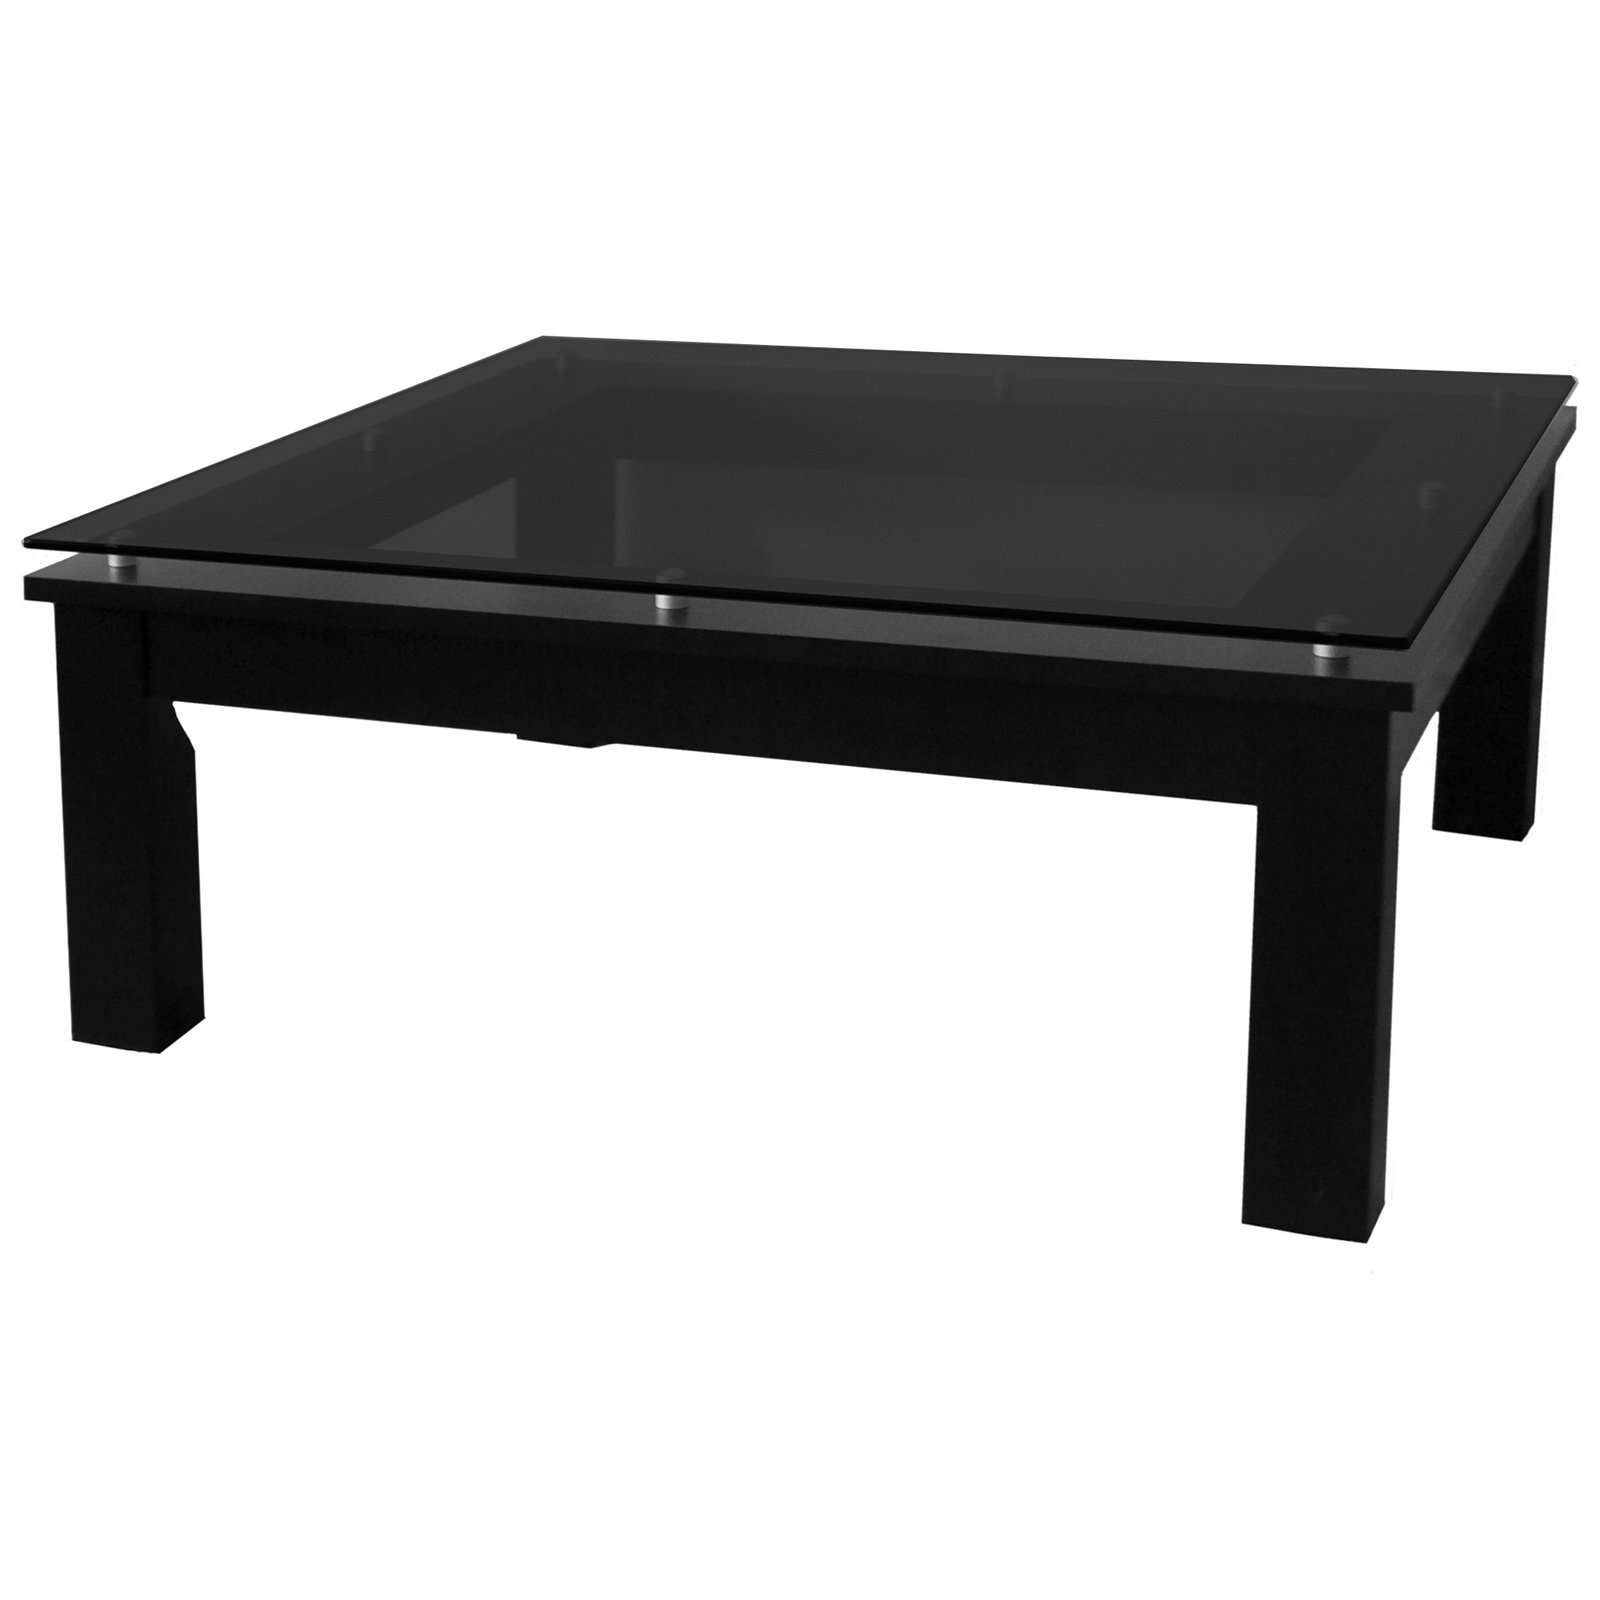 Current Dark Coffee Tables Regarding Coffee Tables Ideas: Wonderful Black Coffee Tables With Storage (View 9 of 20)